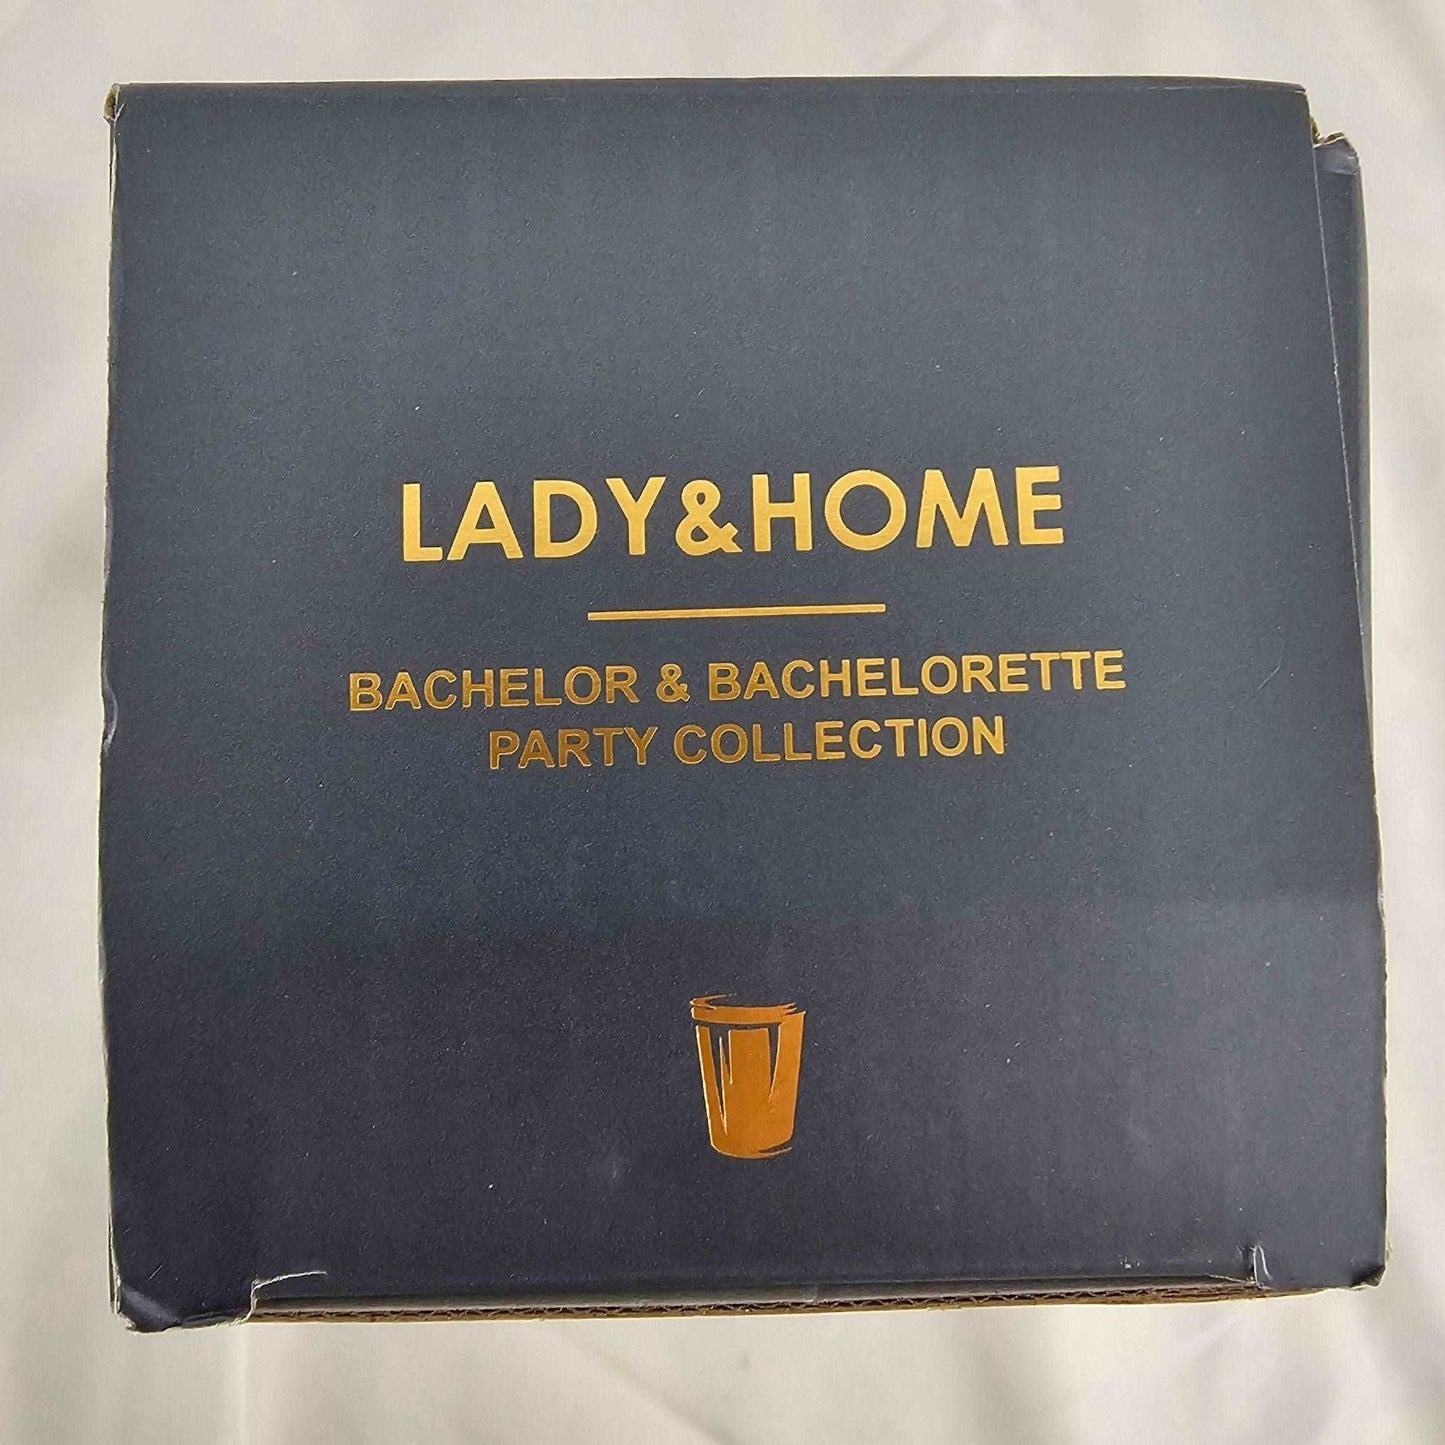 Bachelor and Bachelerotte Party Cup Lady & Home 14 Cups - DQ Distribution